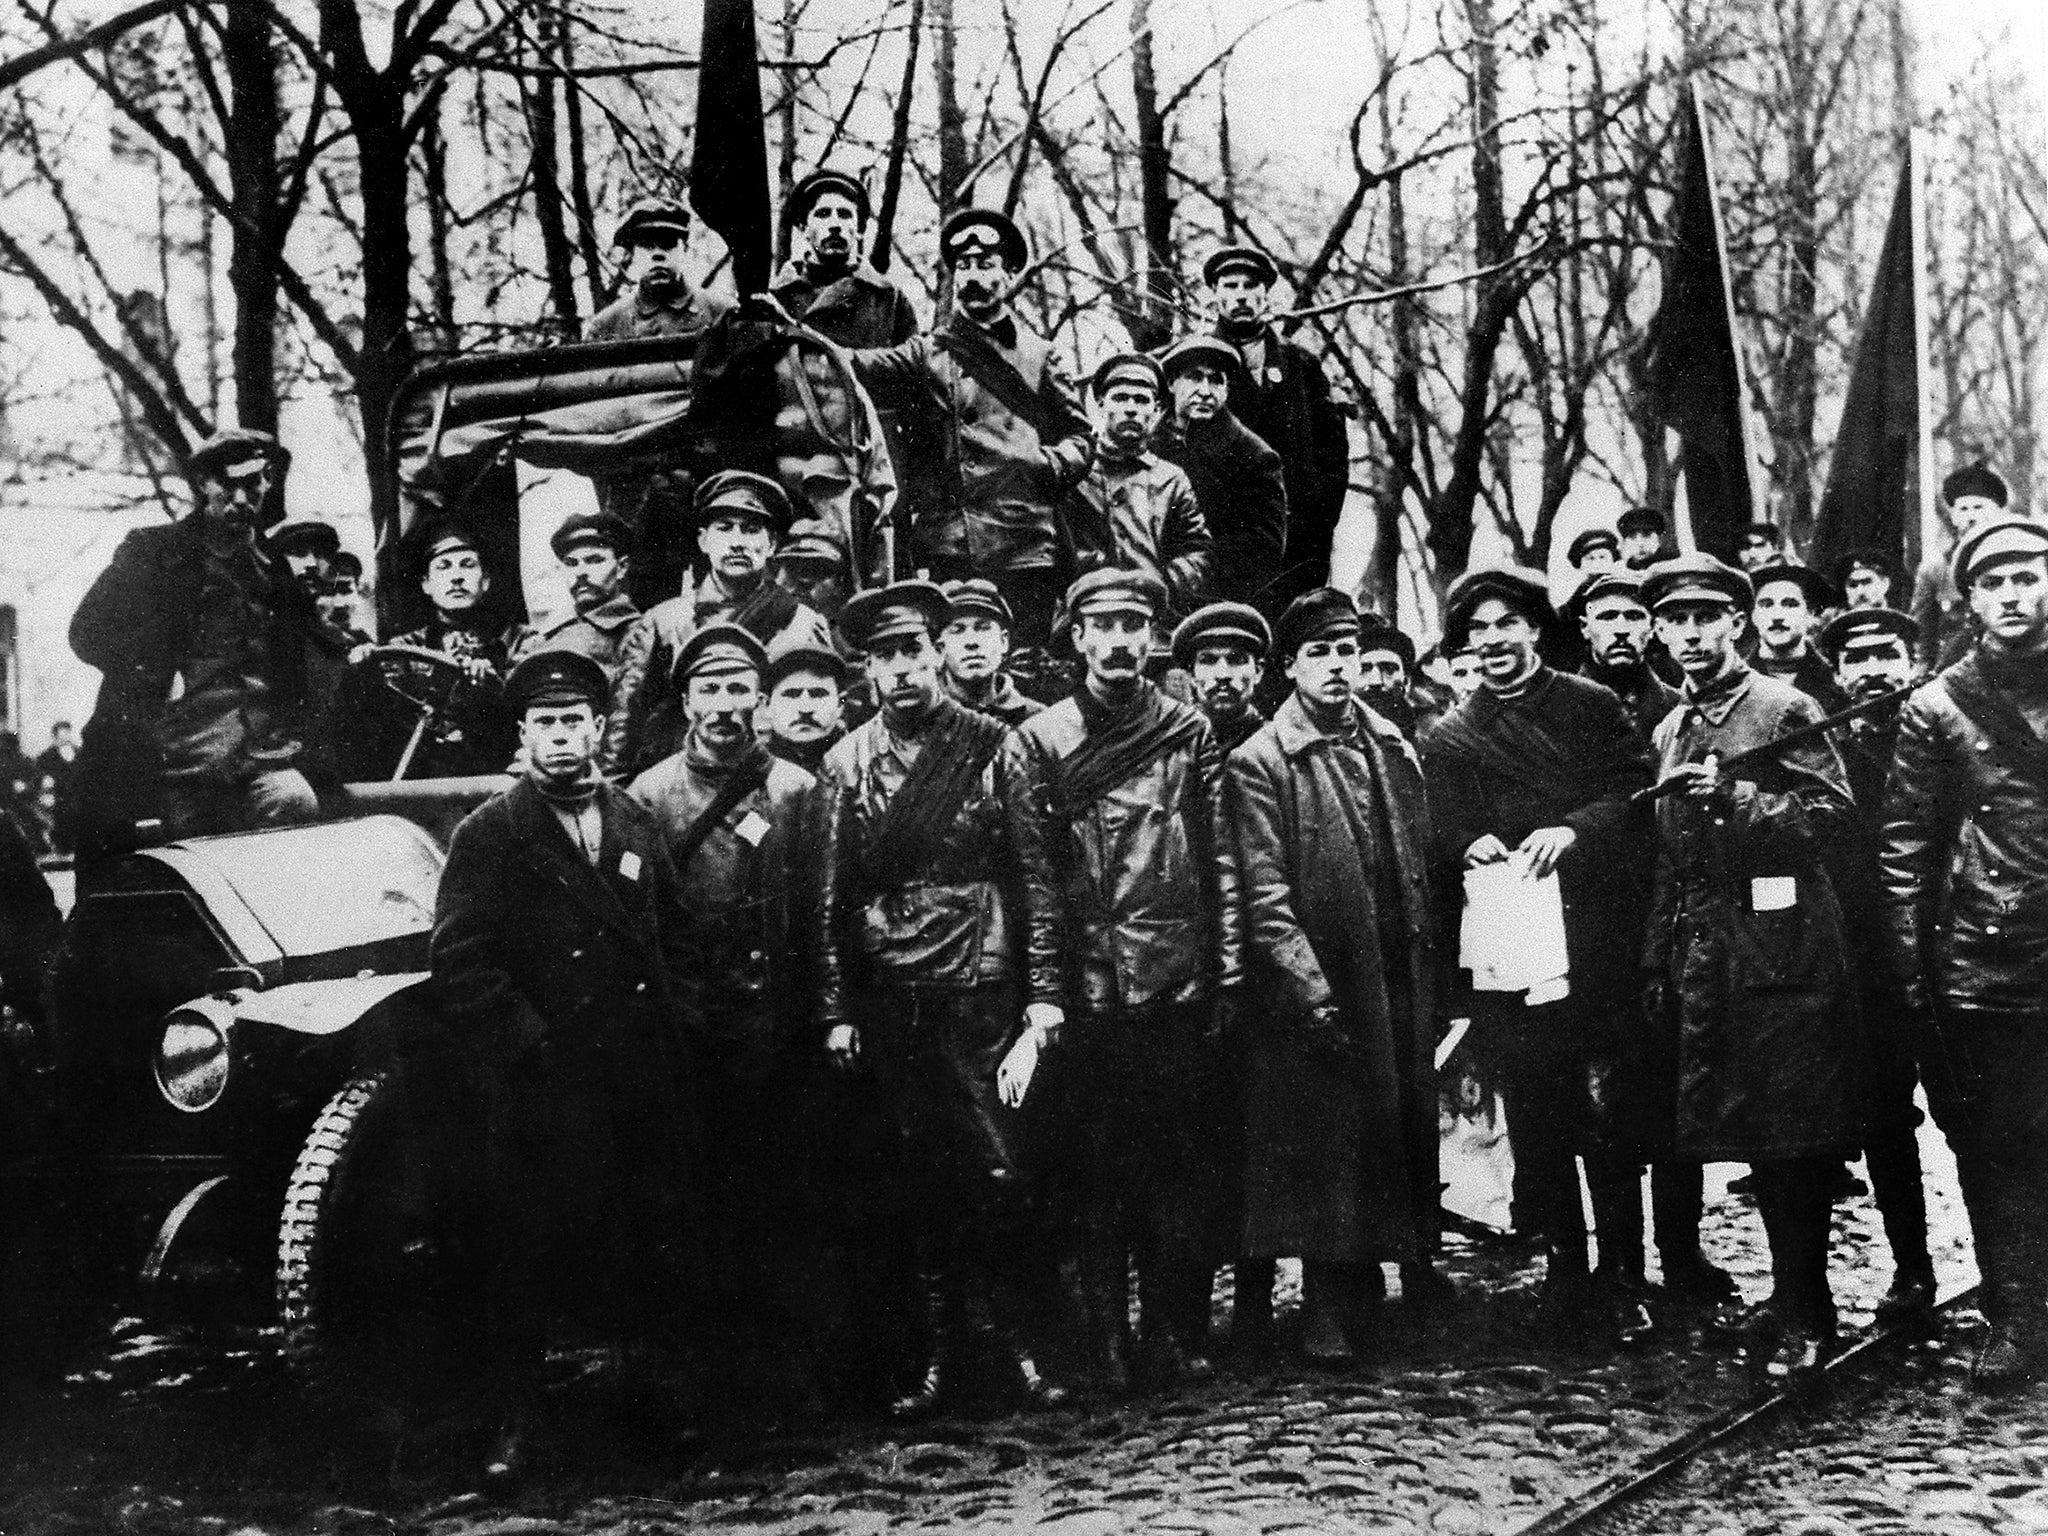 Bolshevik fighters in Petrograd in 1917, following the revolution that ushered in seven decades of communism